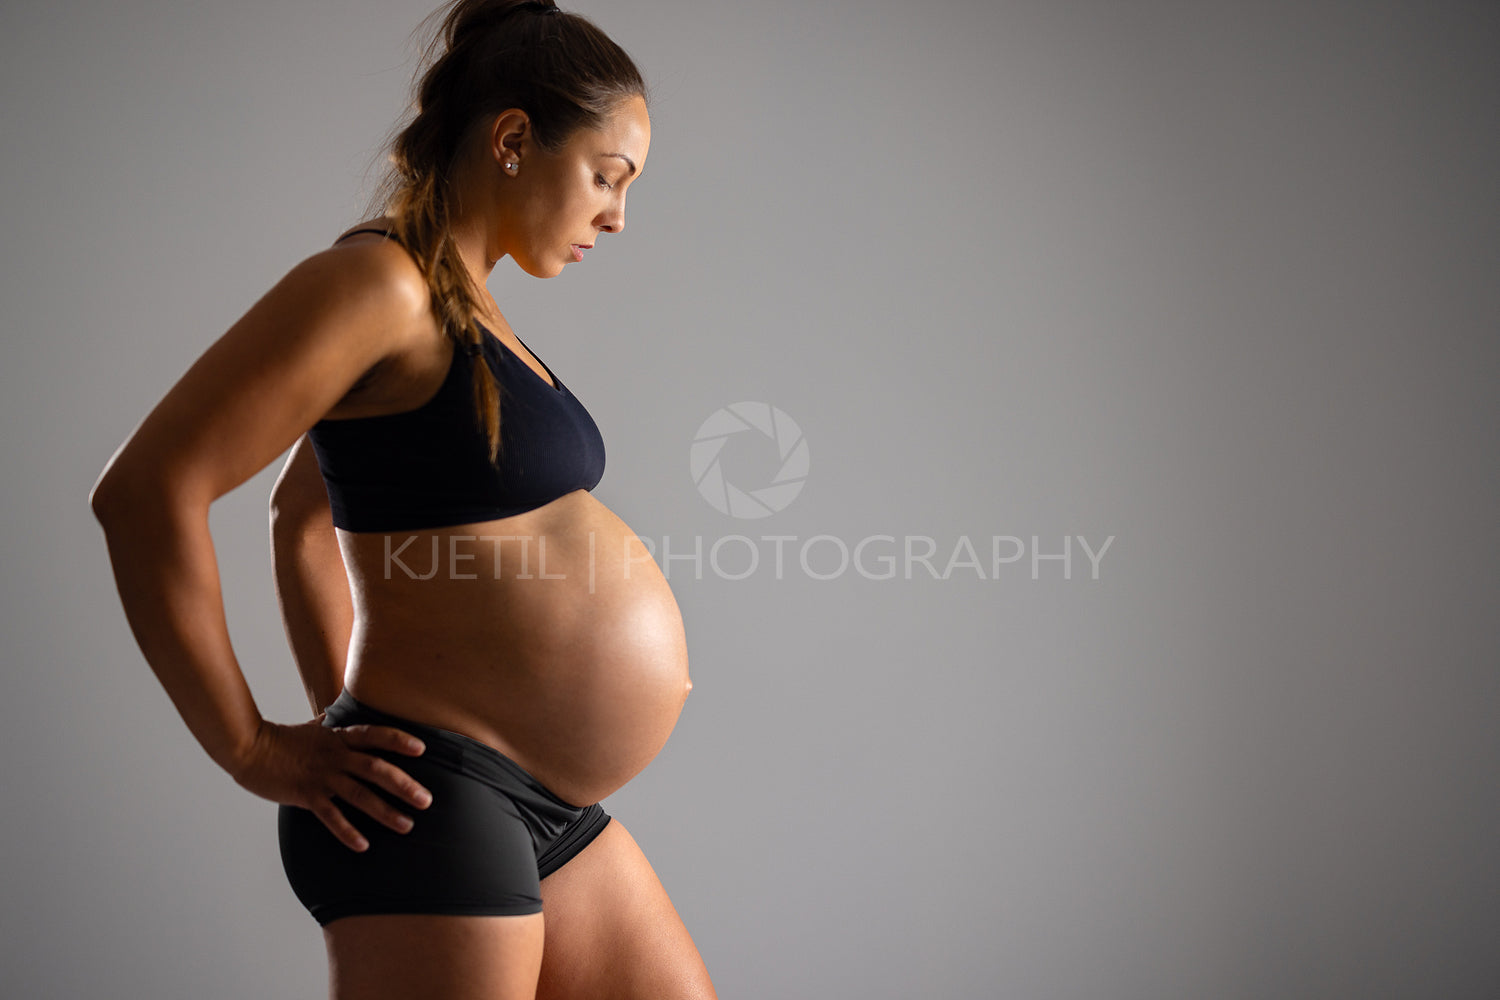 Pregnant woman with bare belly and hands on her hips